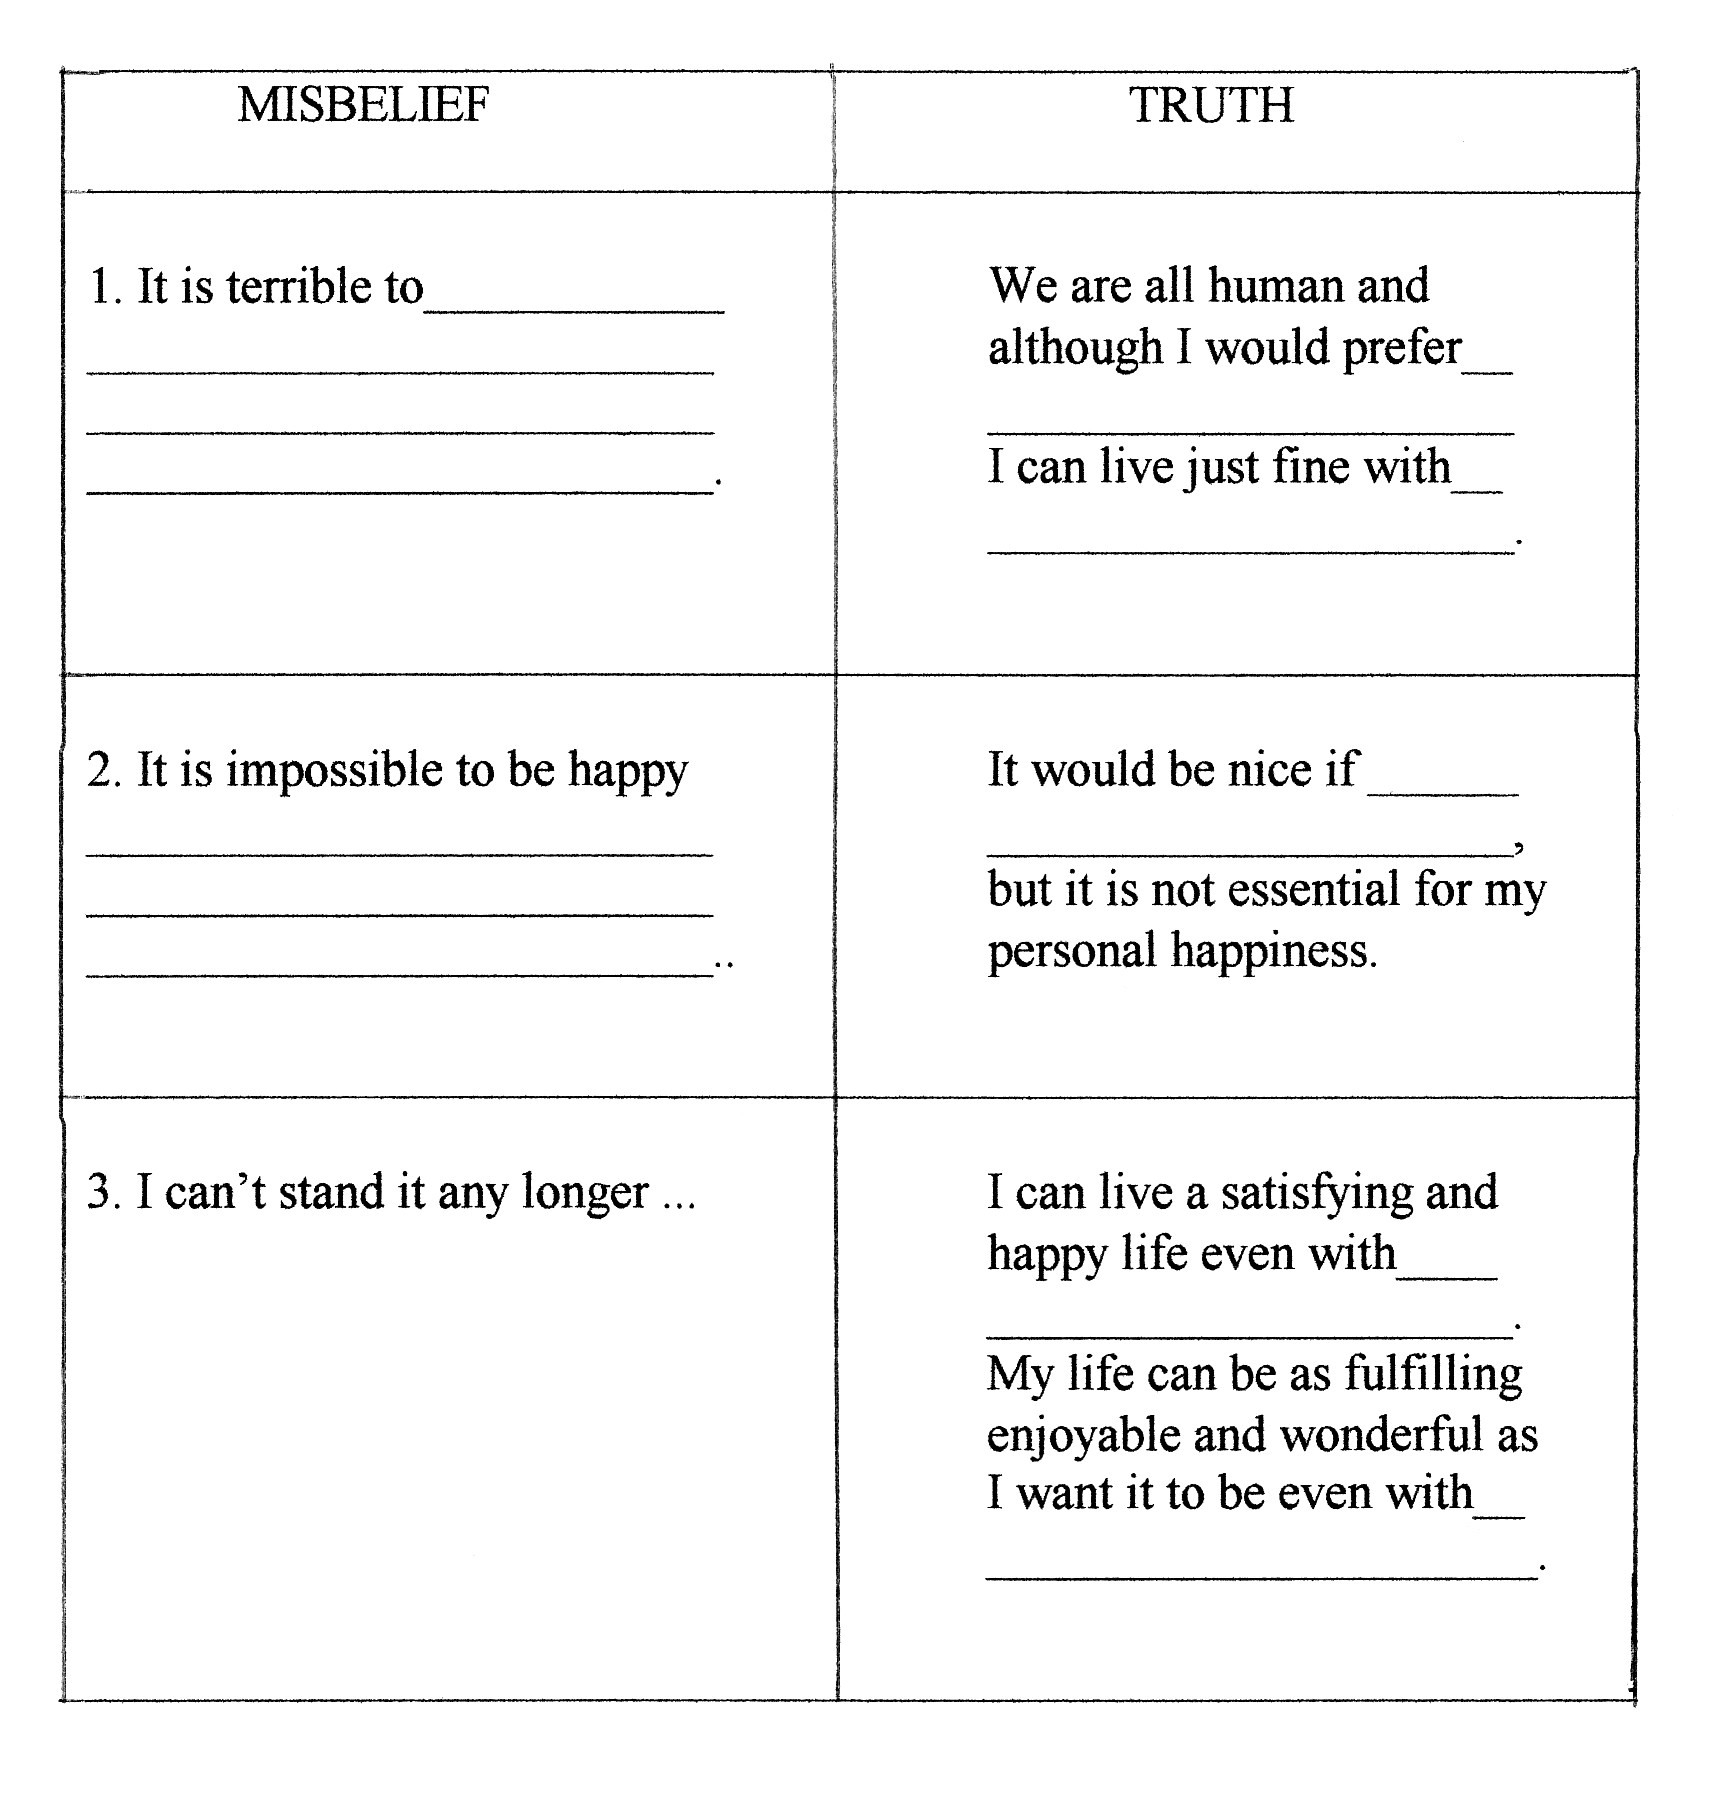 panic attack worksheets pdf db excelcom